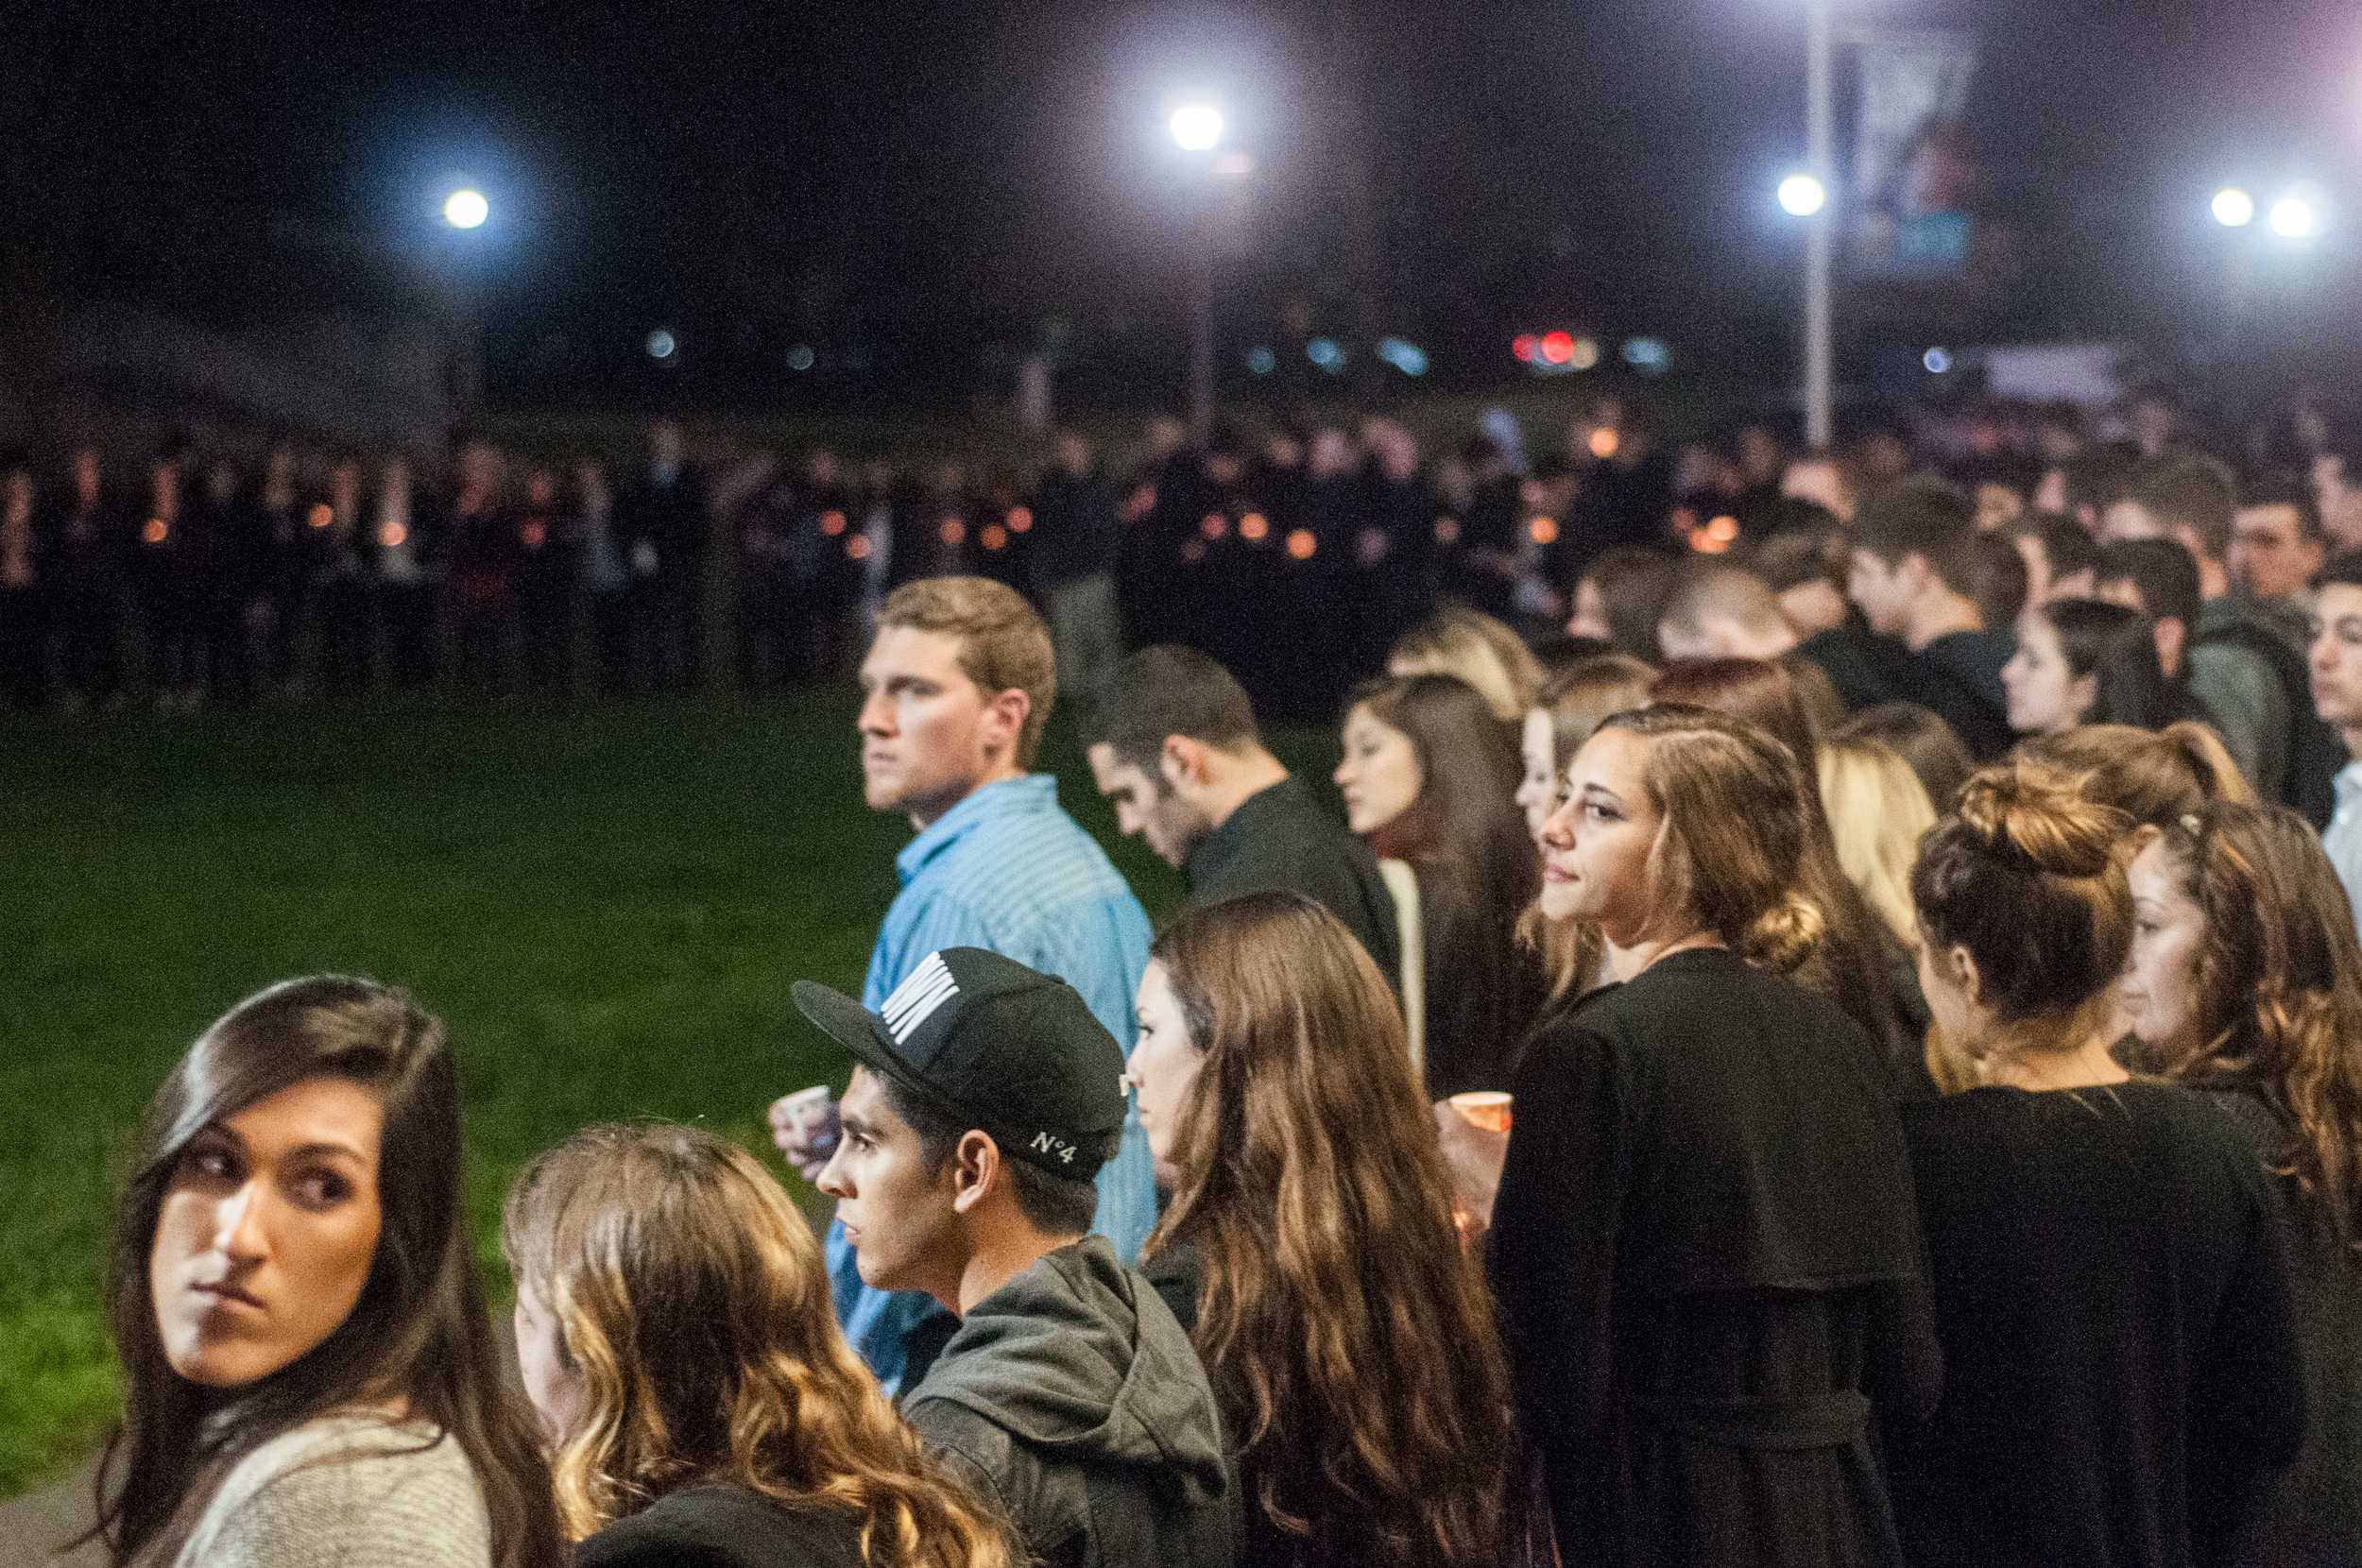 STAR // Gustavo VasquezStudent and member of Alpha Sigma Phi, Francis Lynch, passed away in his sleep on Jan. 15 of unknown causes. On Wednesday, the campus remembered him in a memorial with nearly 700 in attendance.